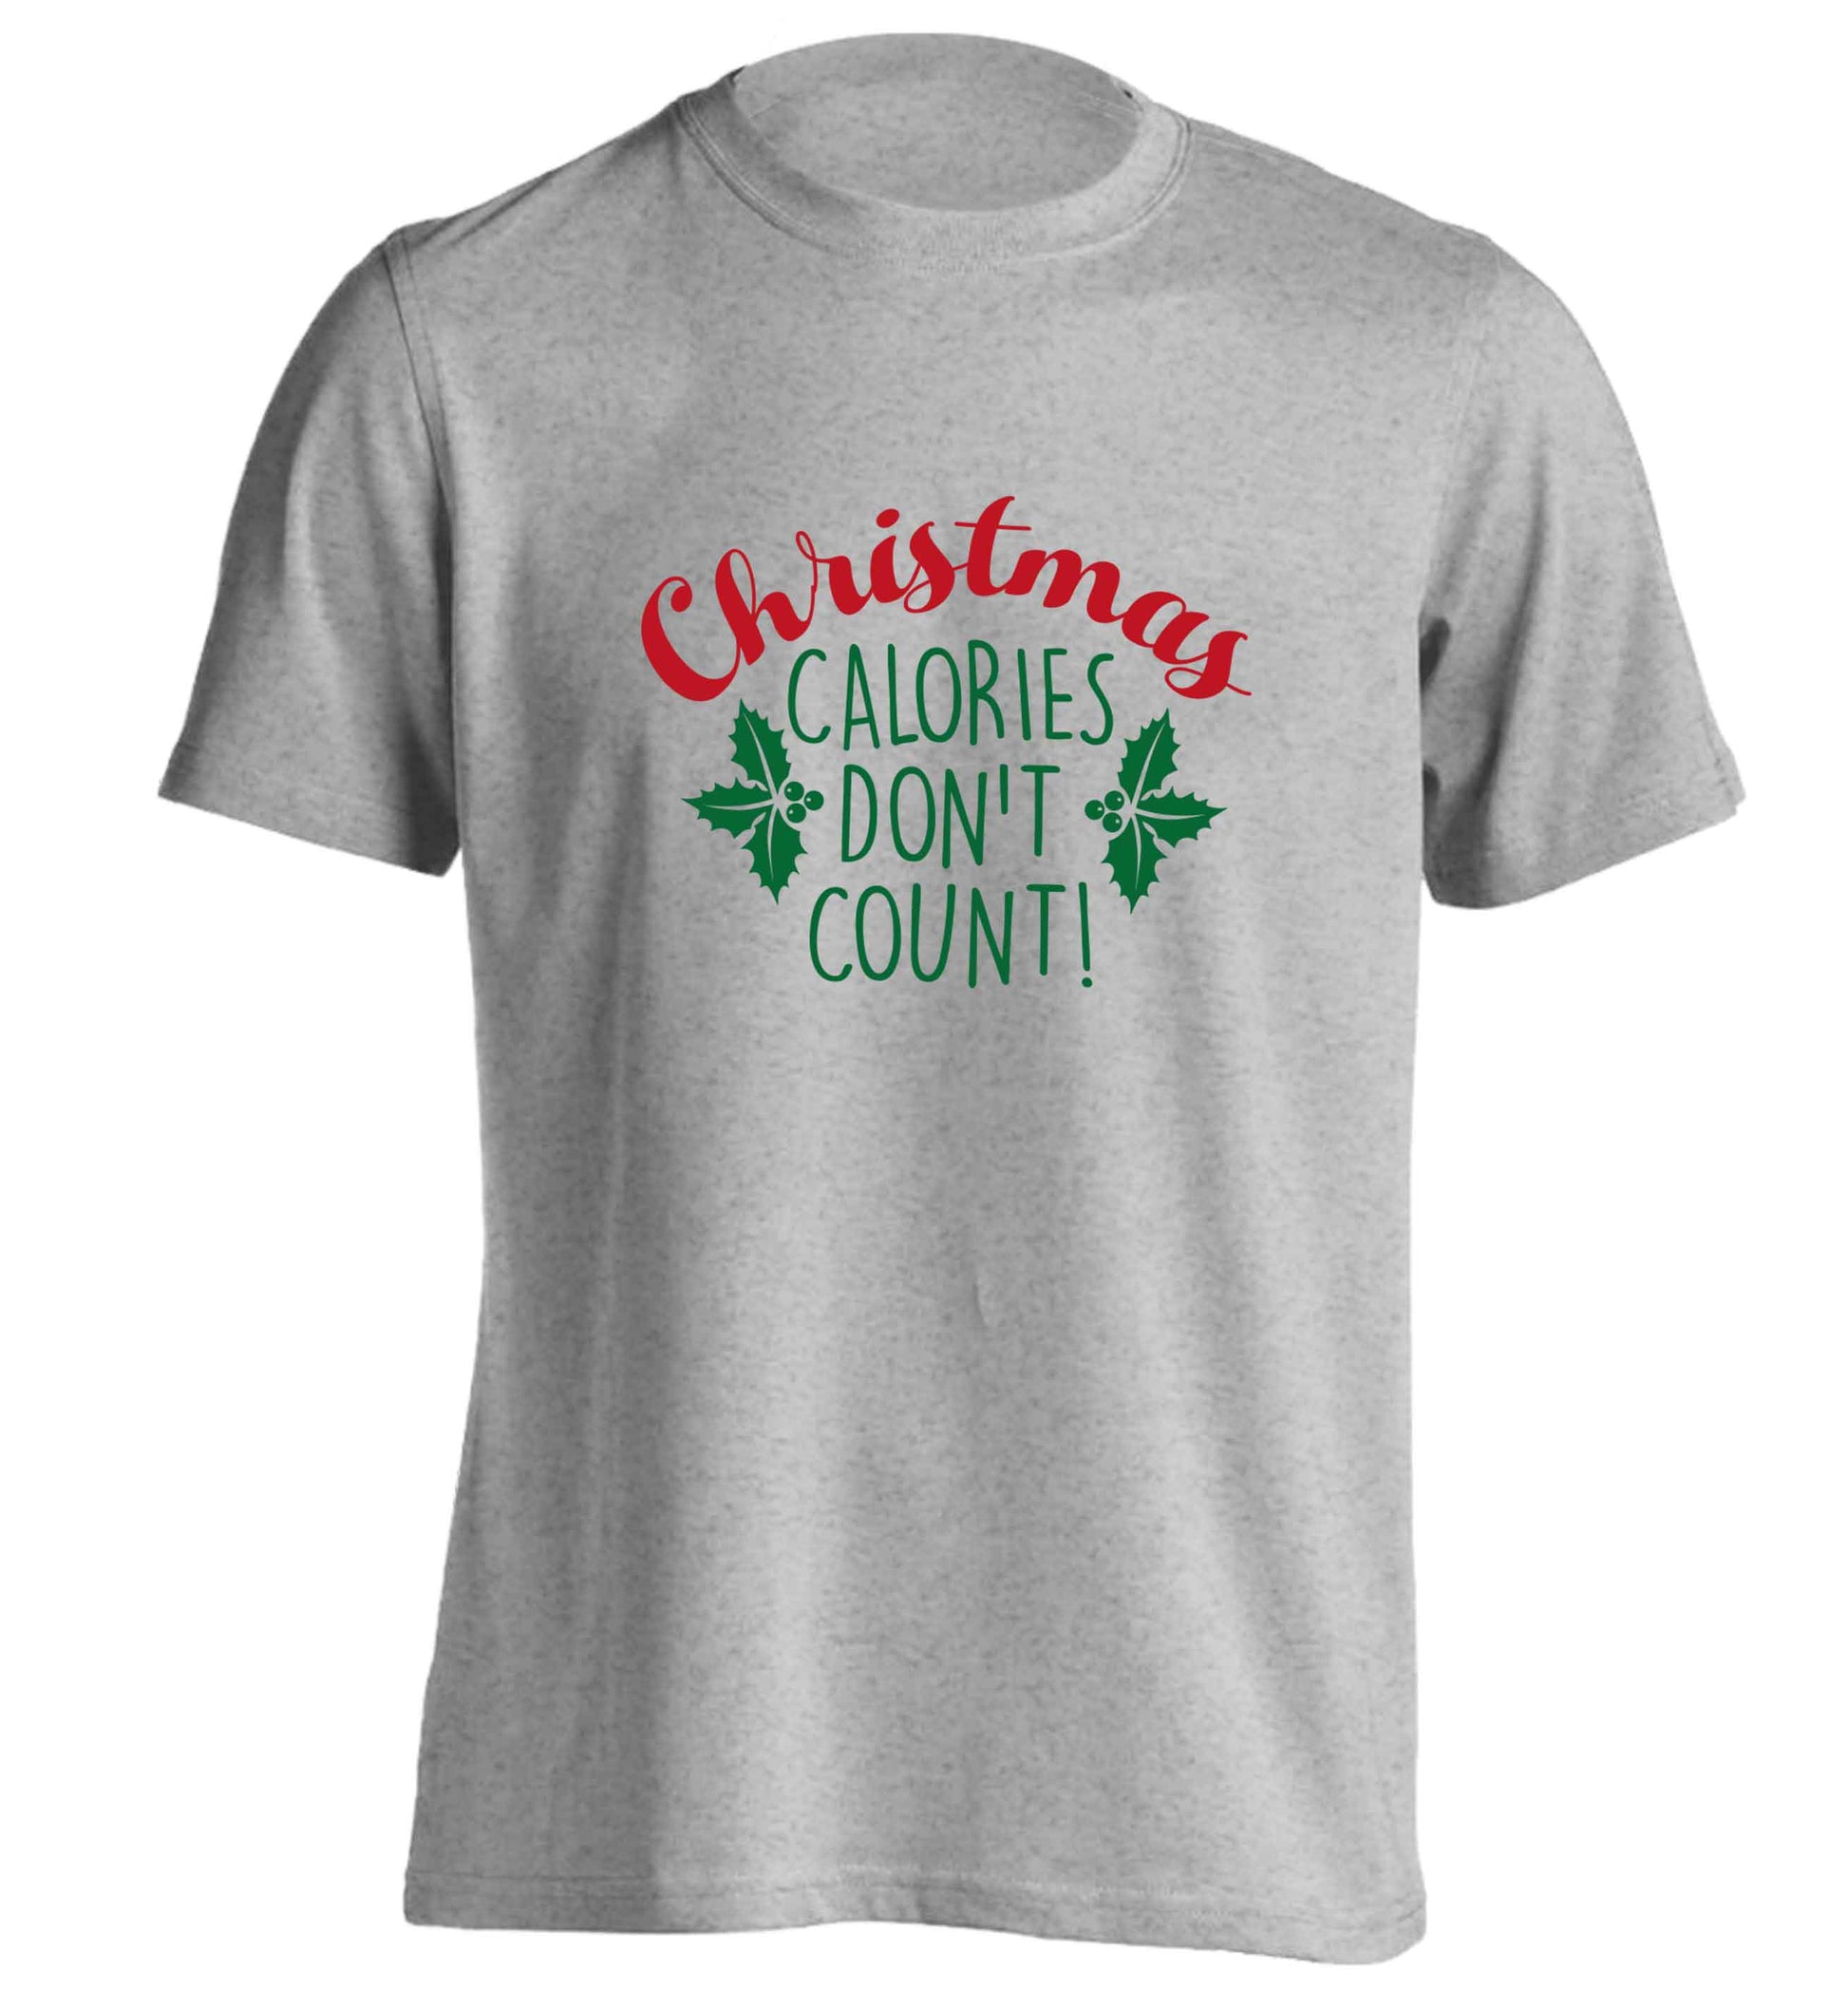 Christmas calories don't count adults unisex grey Tshirt 2XL